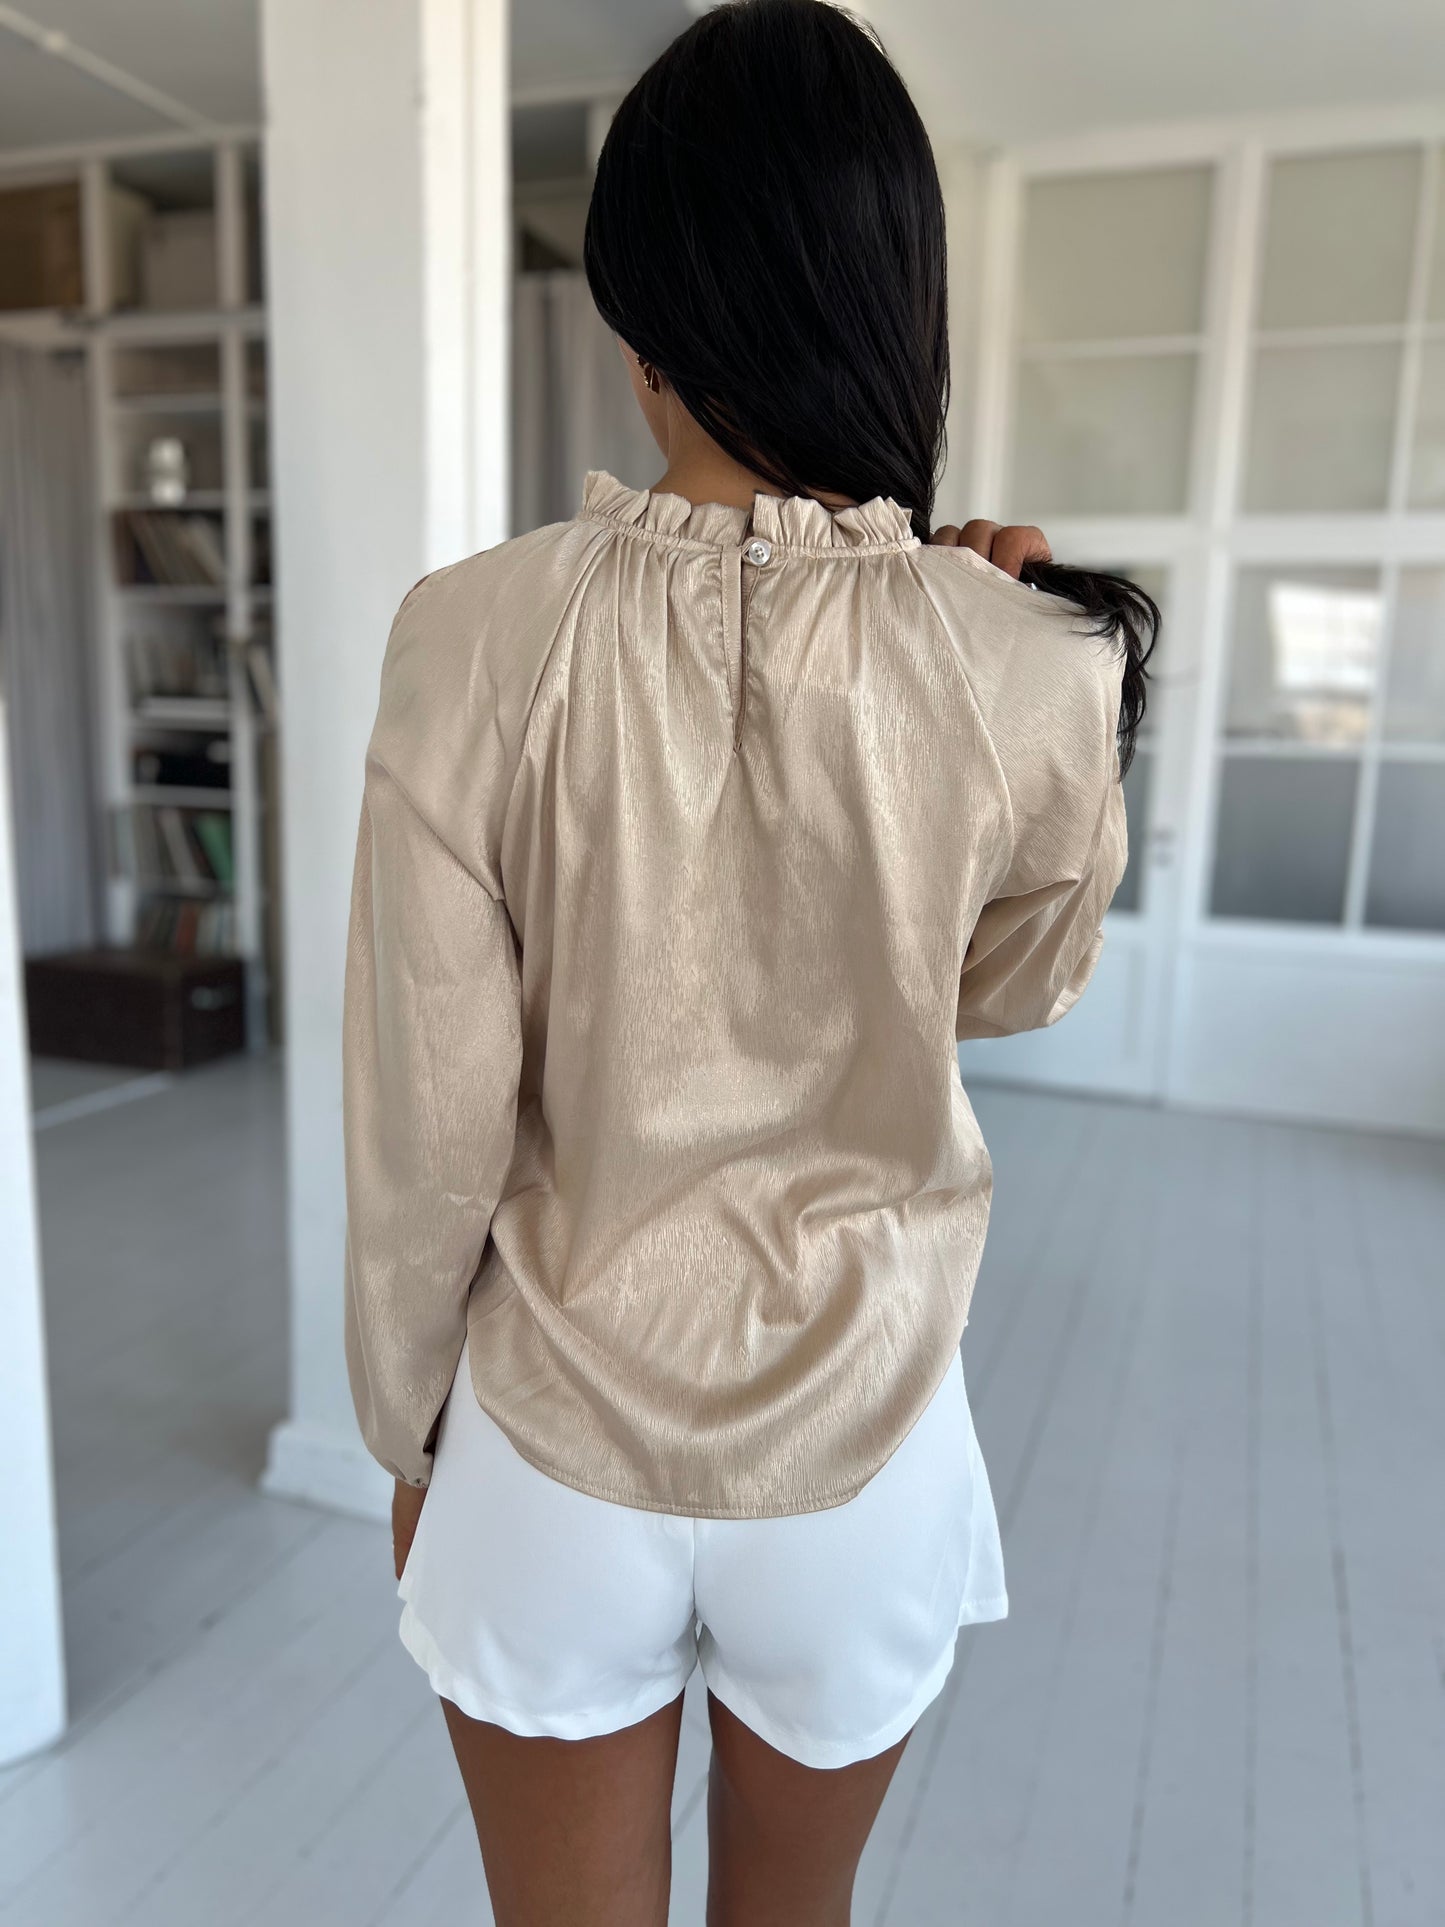 Laura champagne blouse